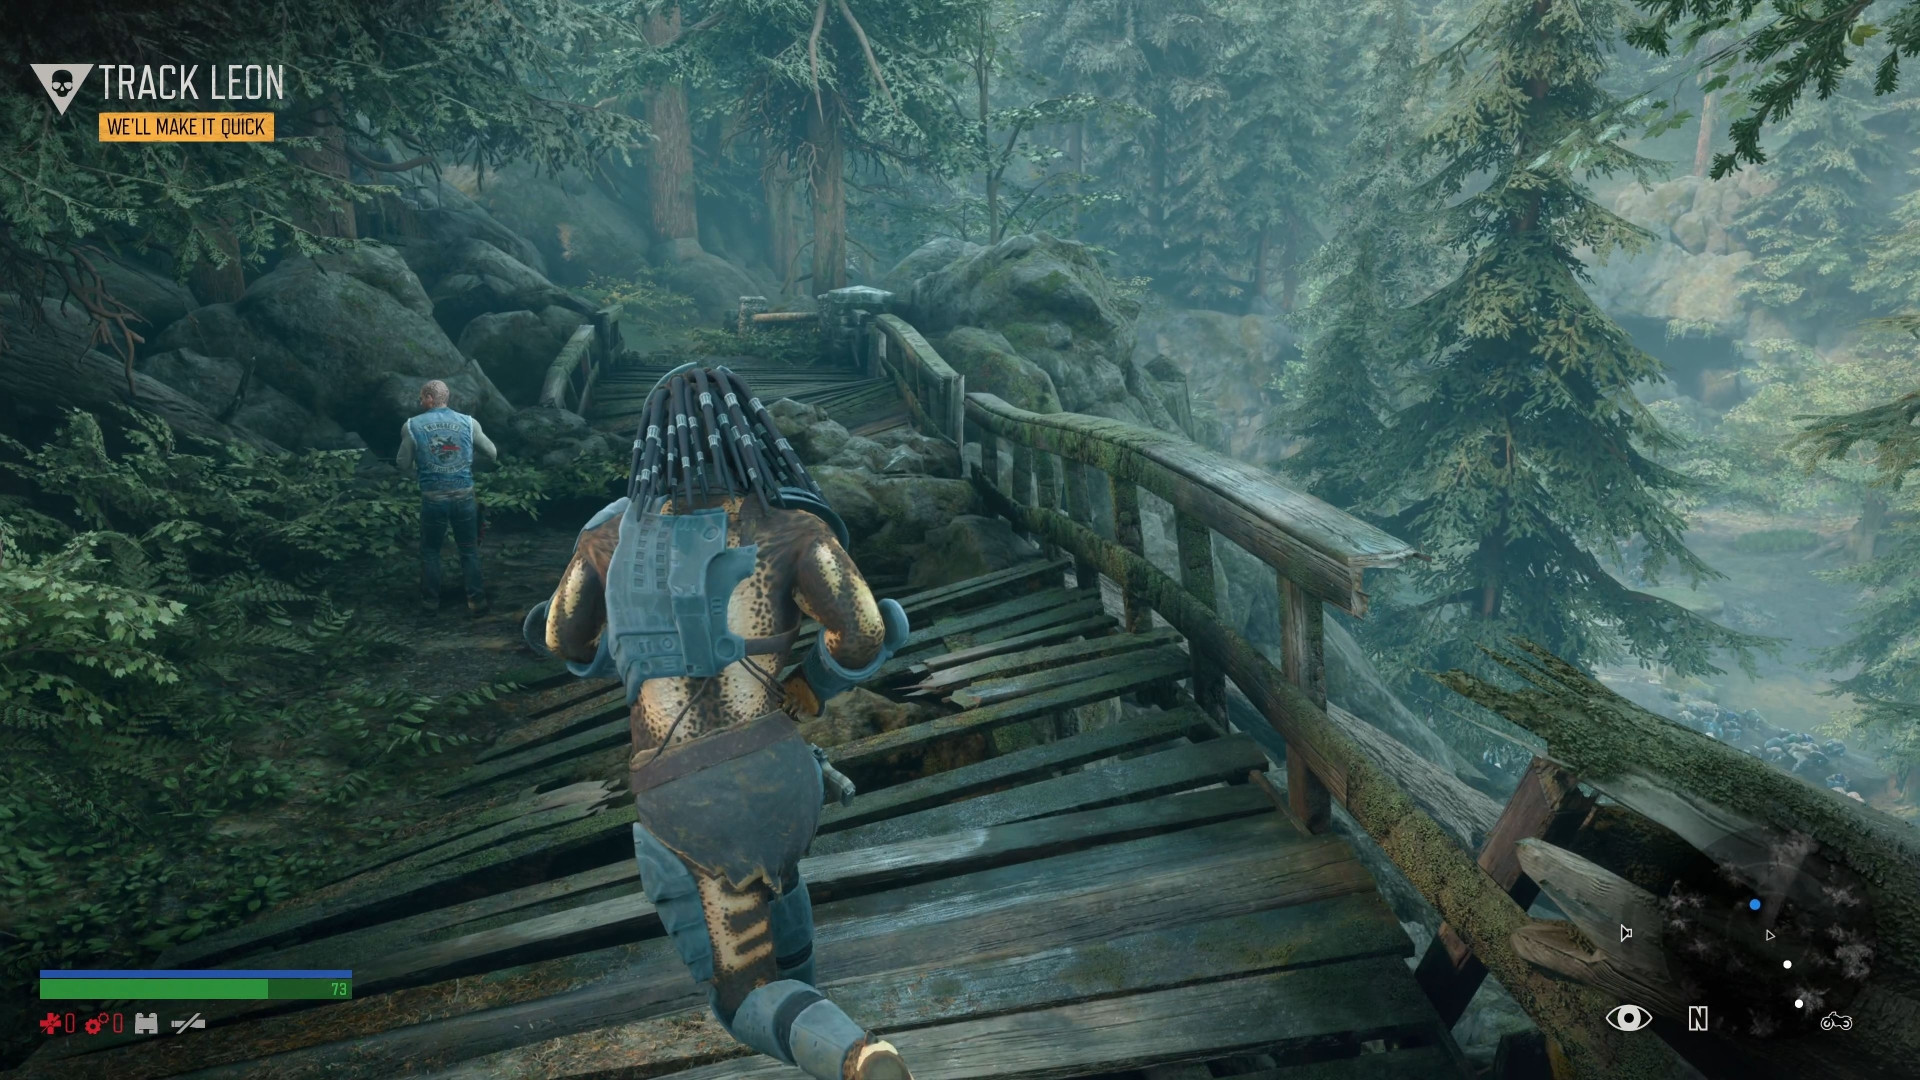 Days Gone Mod Makes The Game Scarier Than Ever Before